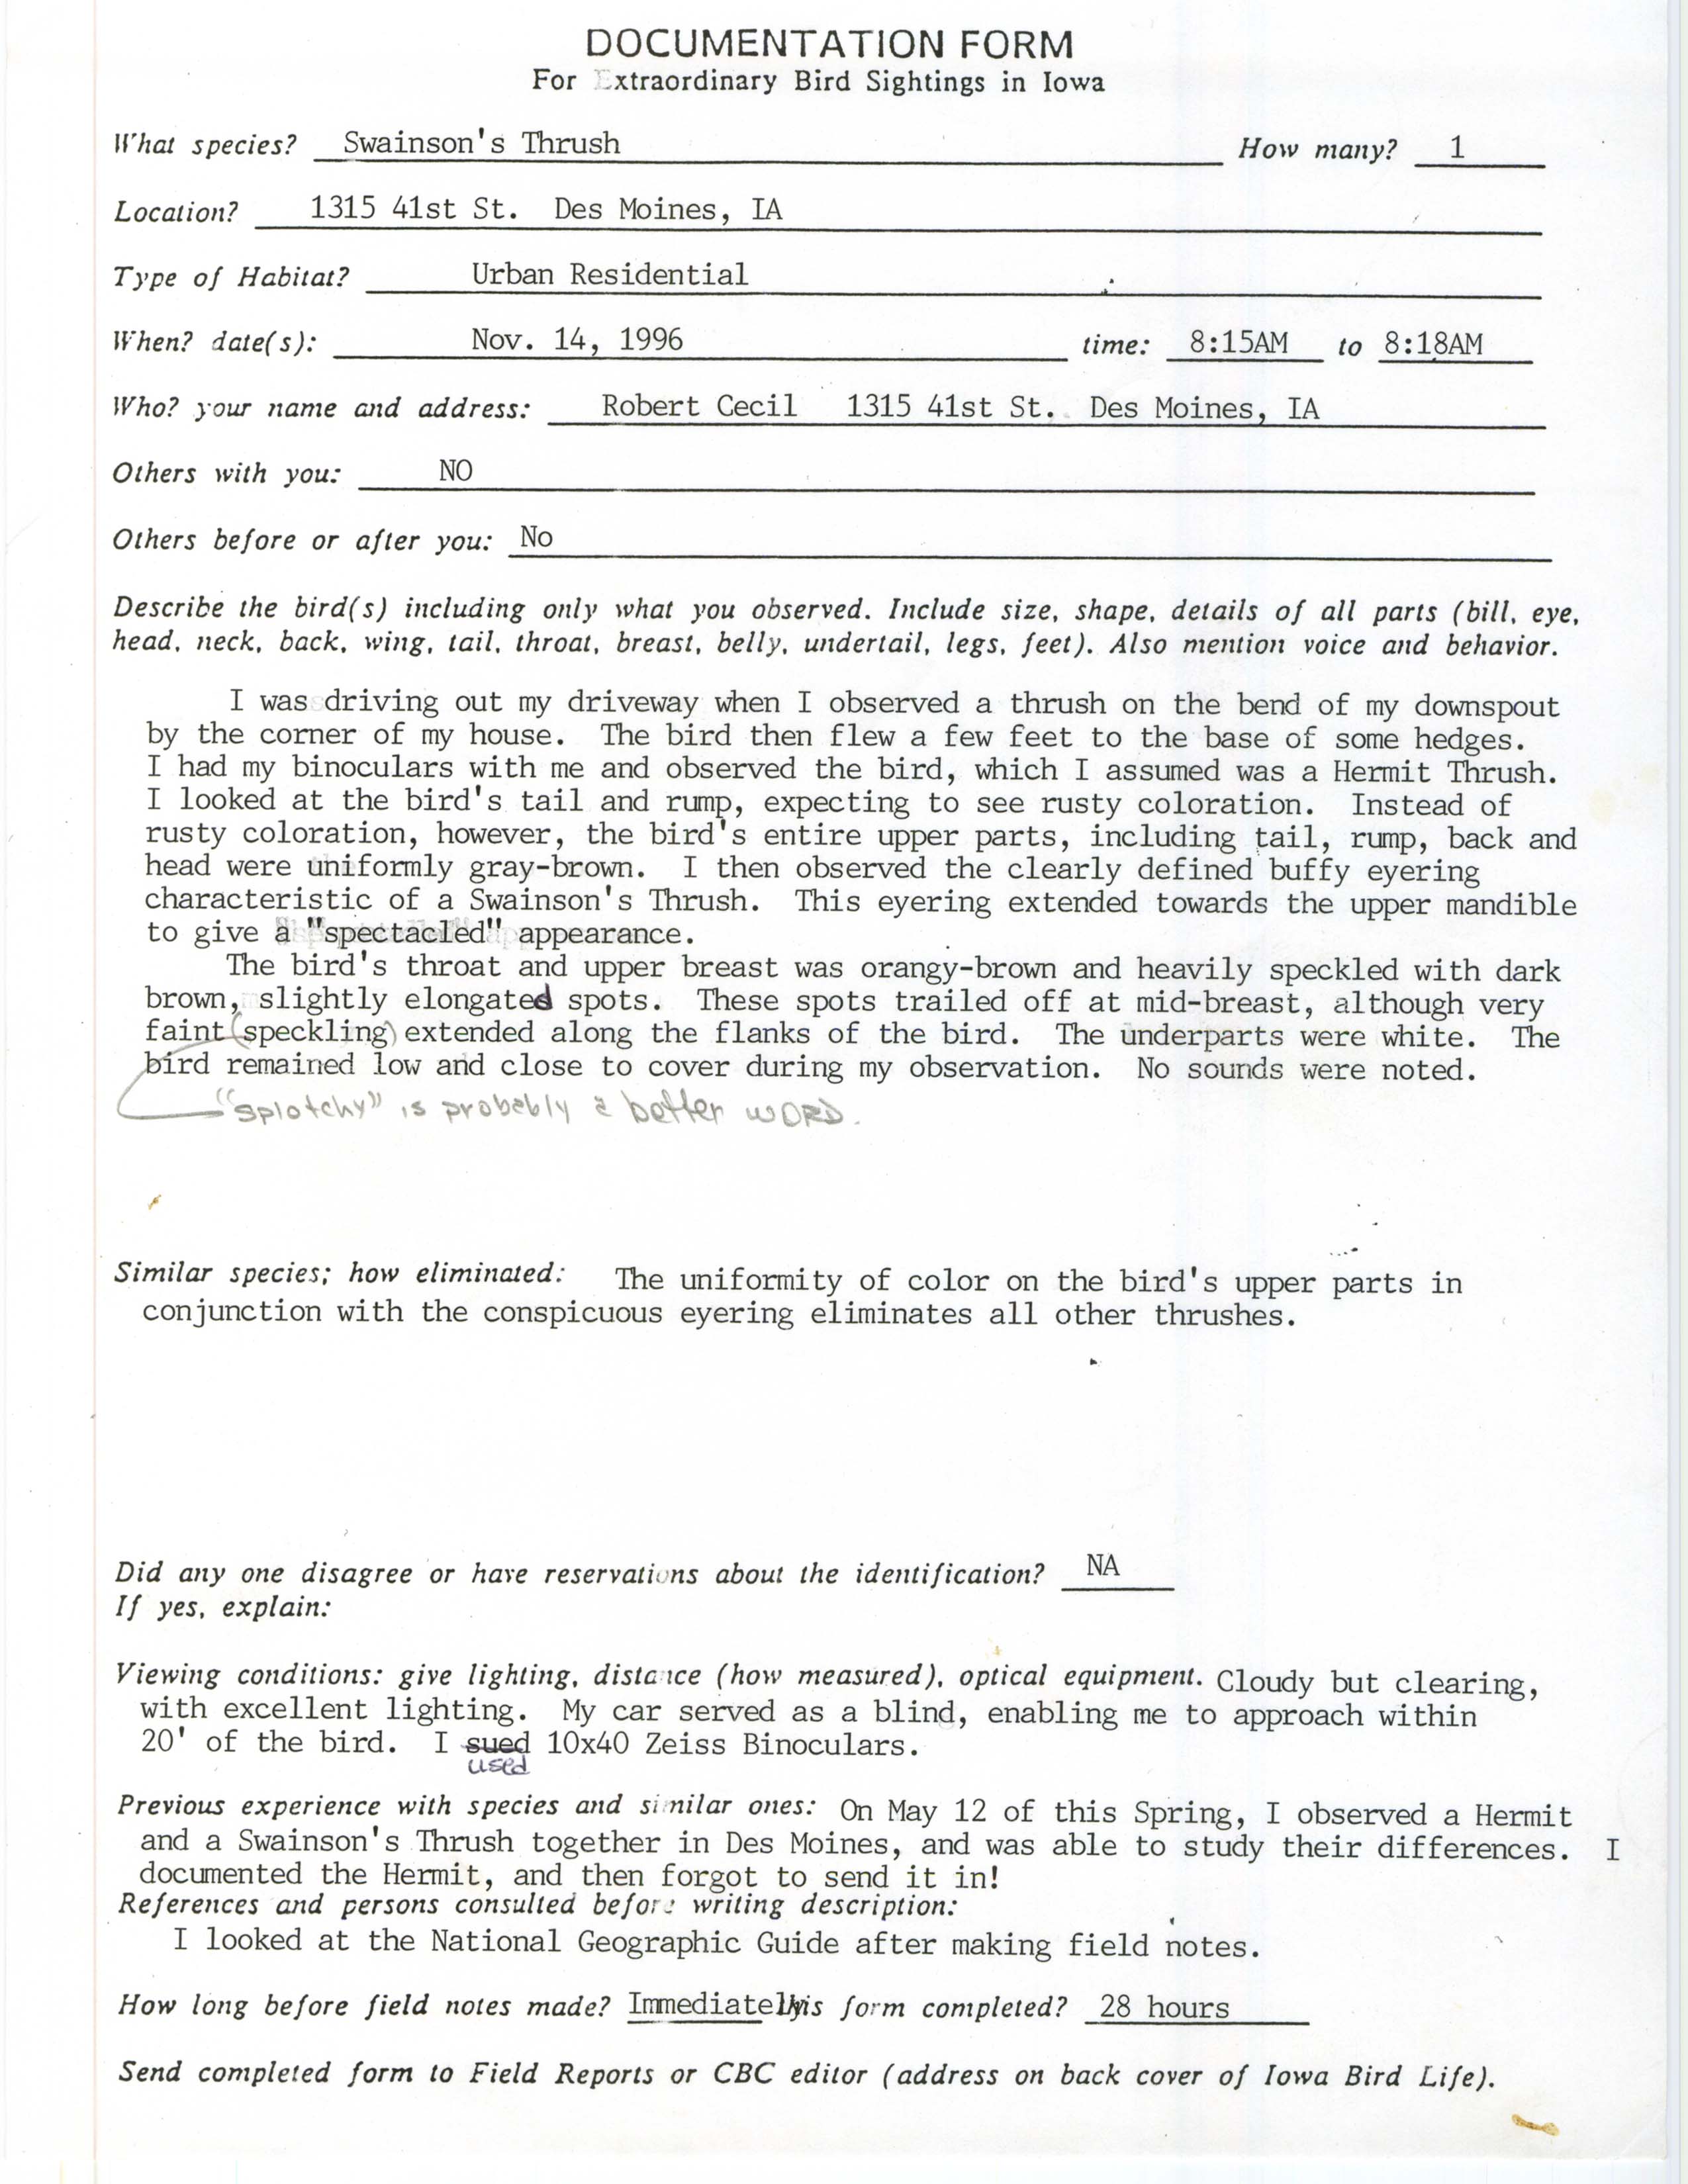 Rare bird documentation form for Swainson's Thrush at Des Moines, 1996